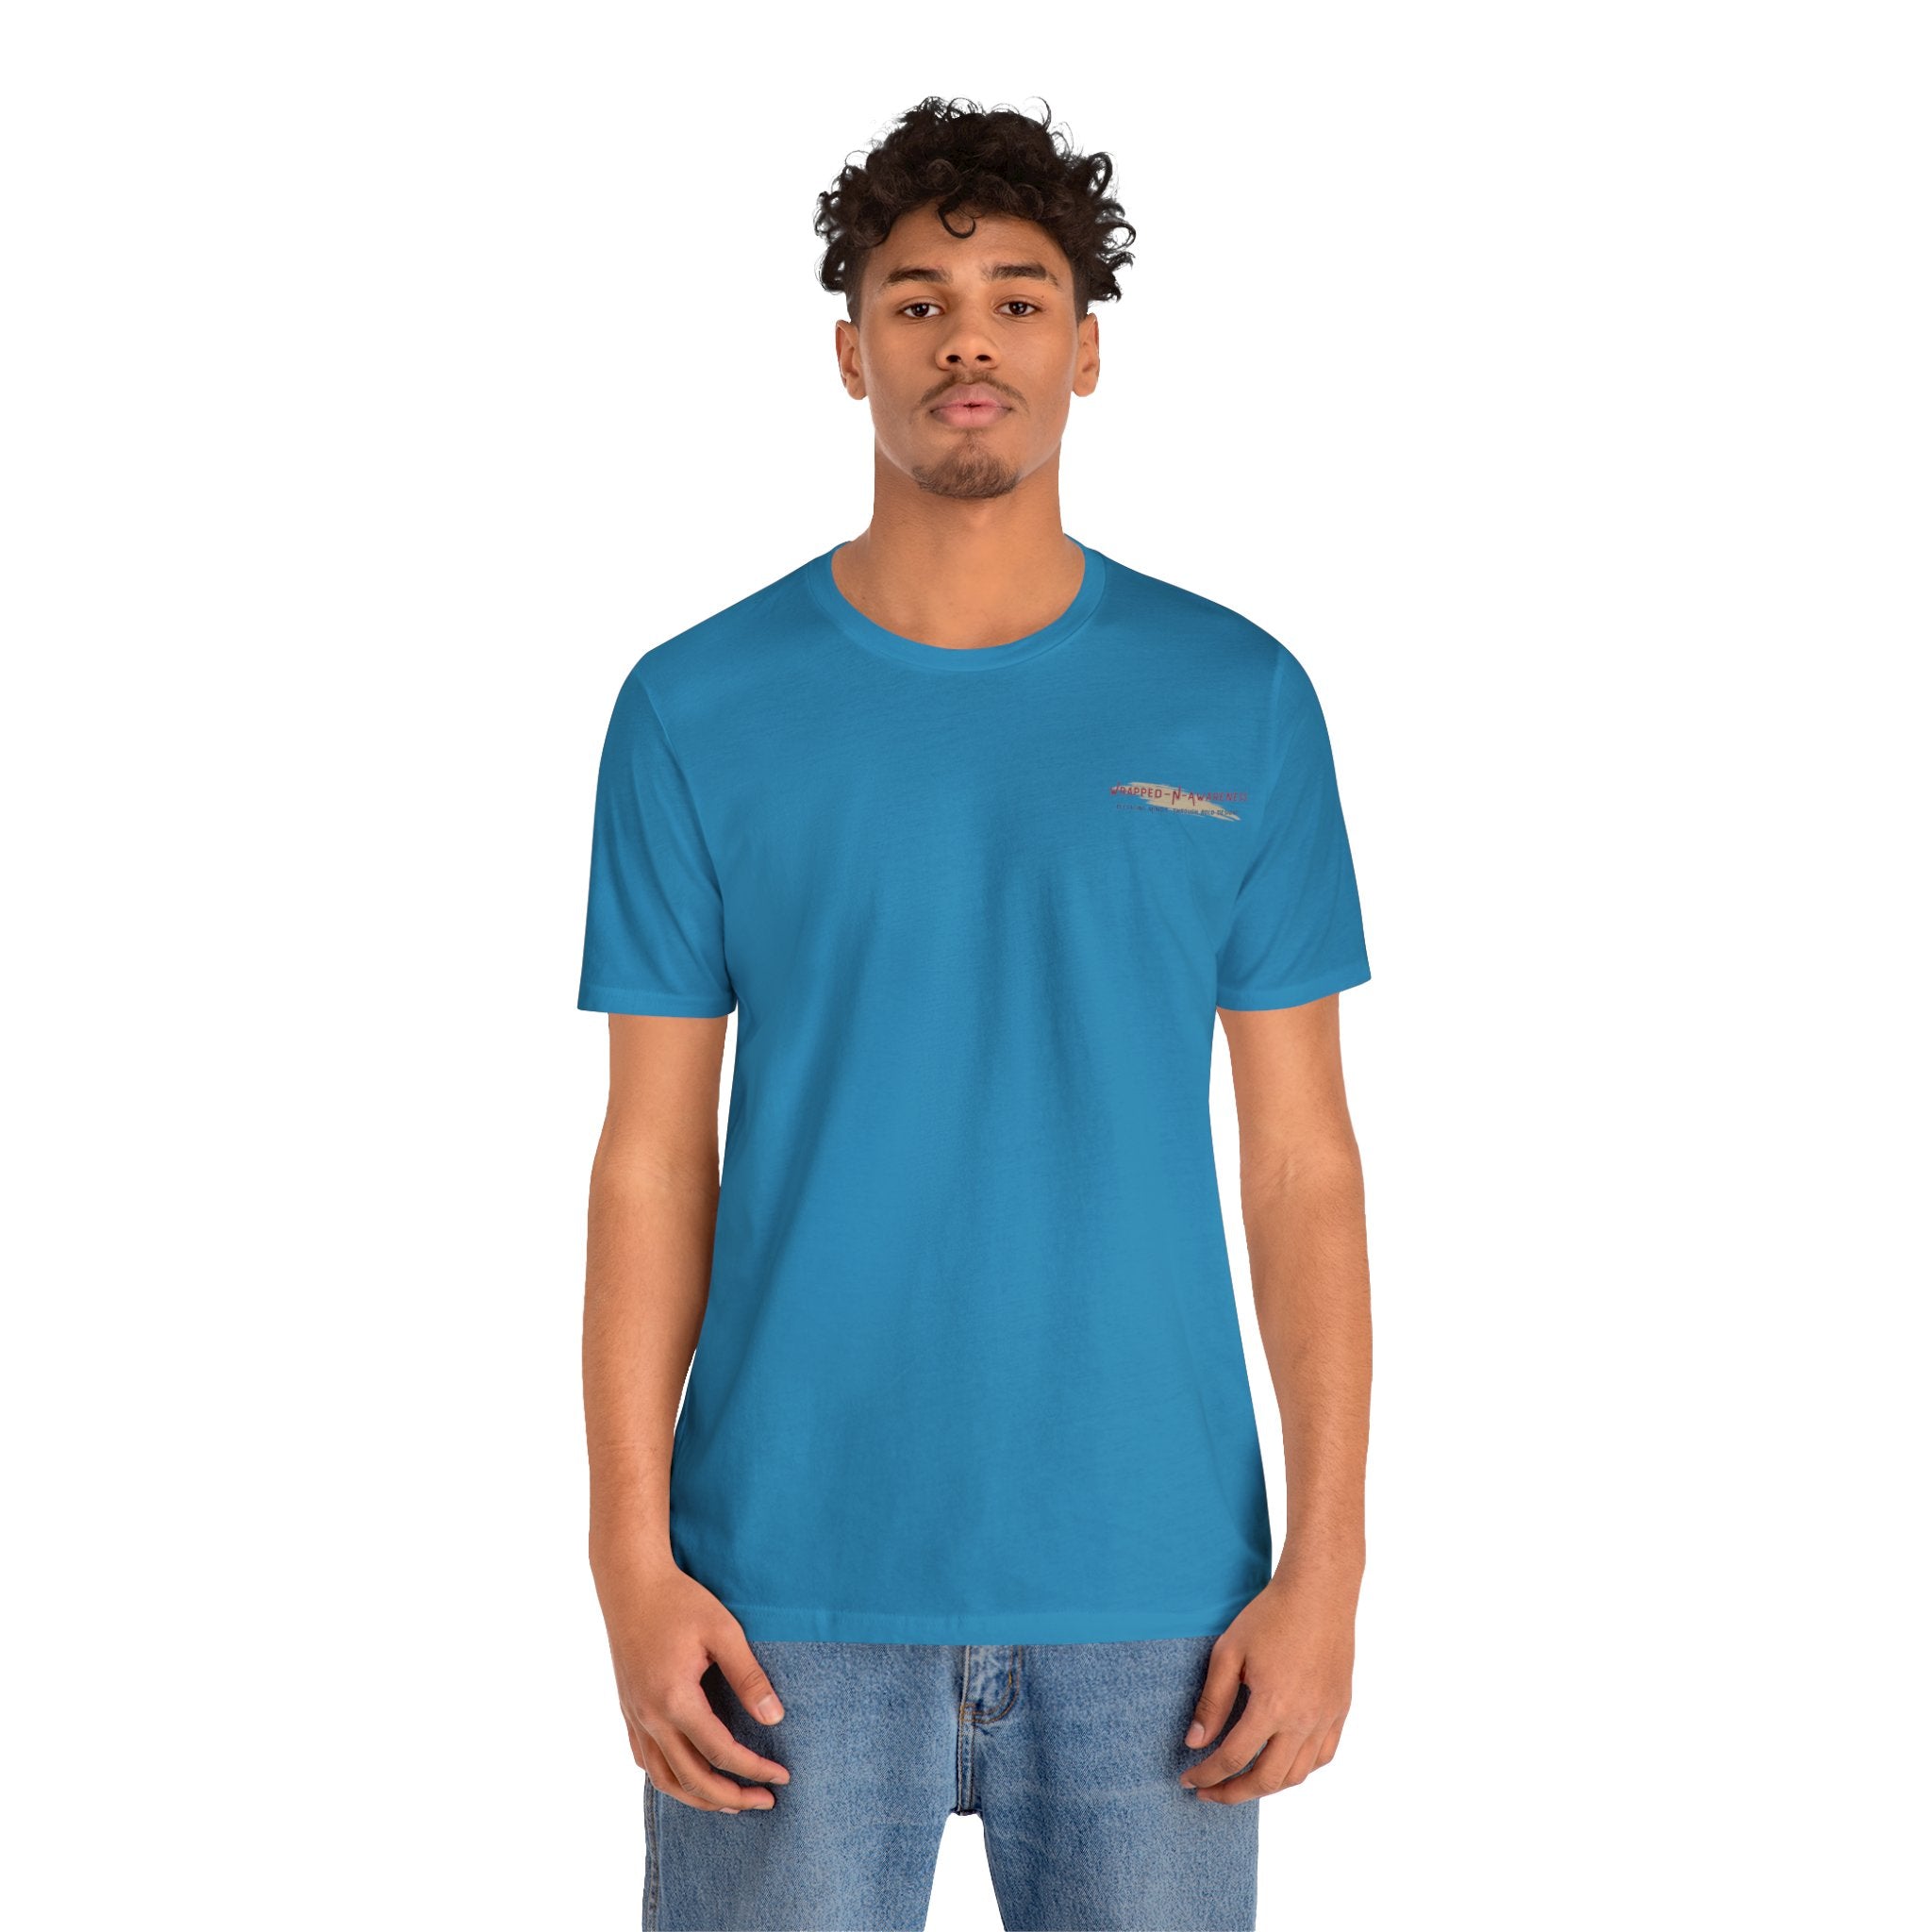 Mindfulness Heals Wounds Tee - Bella+Canvas 3001 Turquoise Airlume Cotton Bella+Canvas 3001 Crew Neckline Jersey Short Sleeve Lightweight Fabric Mental Health Support Retail Fit Tear-away Label Tee Unisex Tee T-Shirt 7092957812582737087_2048 Printify